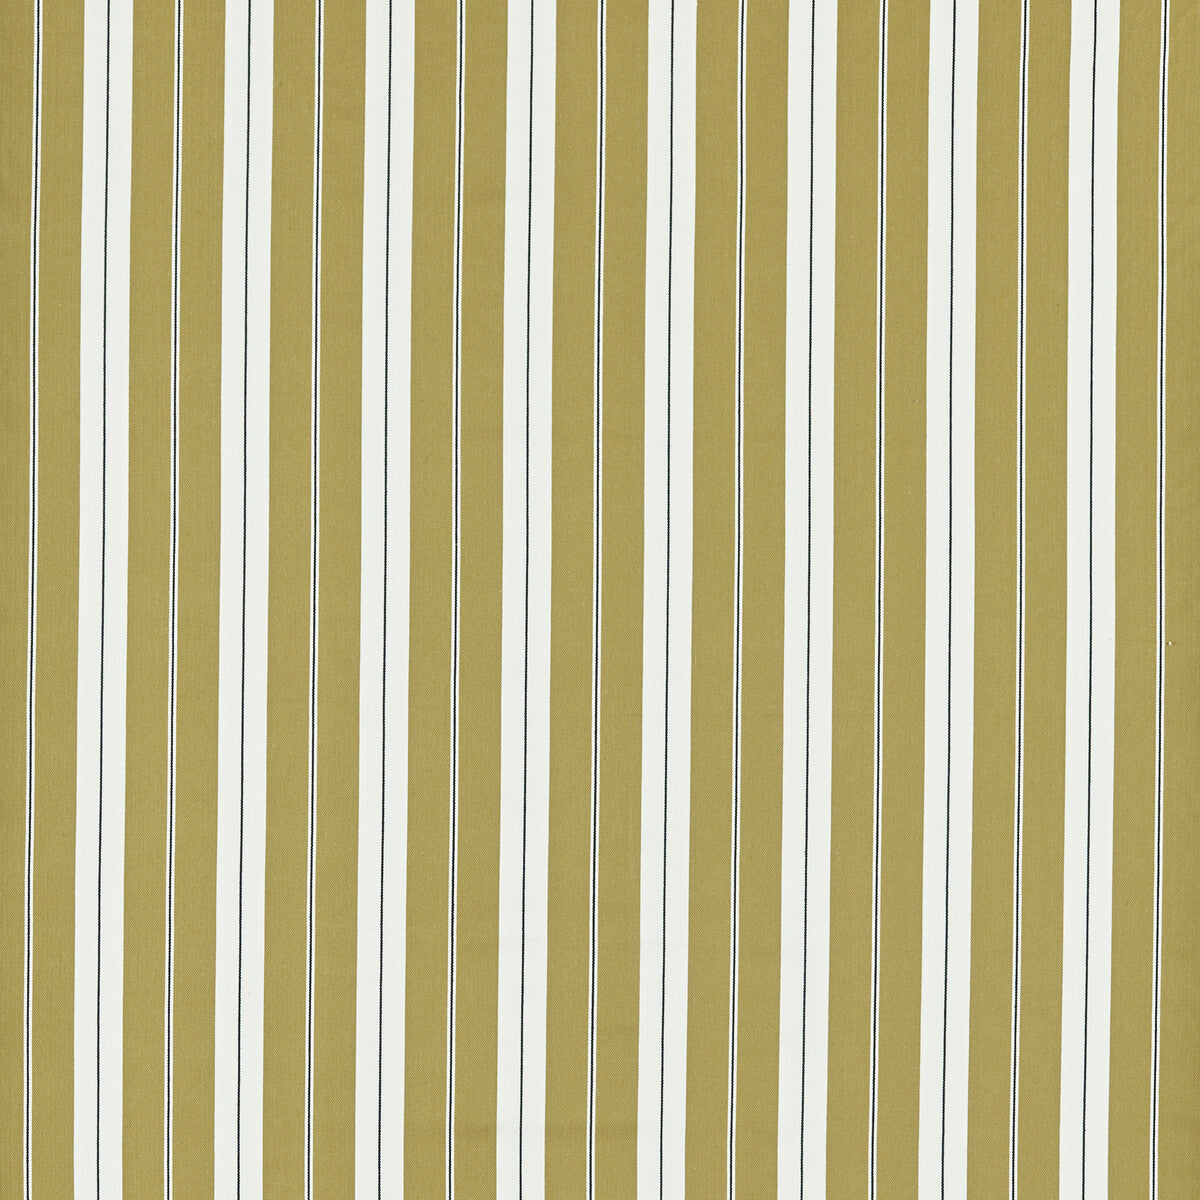 Belgravia fabric in ochre/charcoal color - pattern F1497/04.CAC.0 - by Clarke And Clarke in the Clarke &amp; Clarke Edgeworth collection